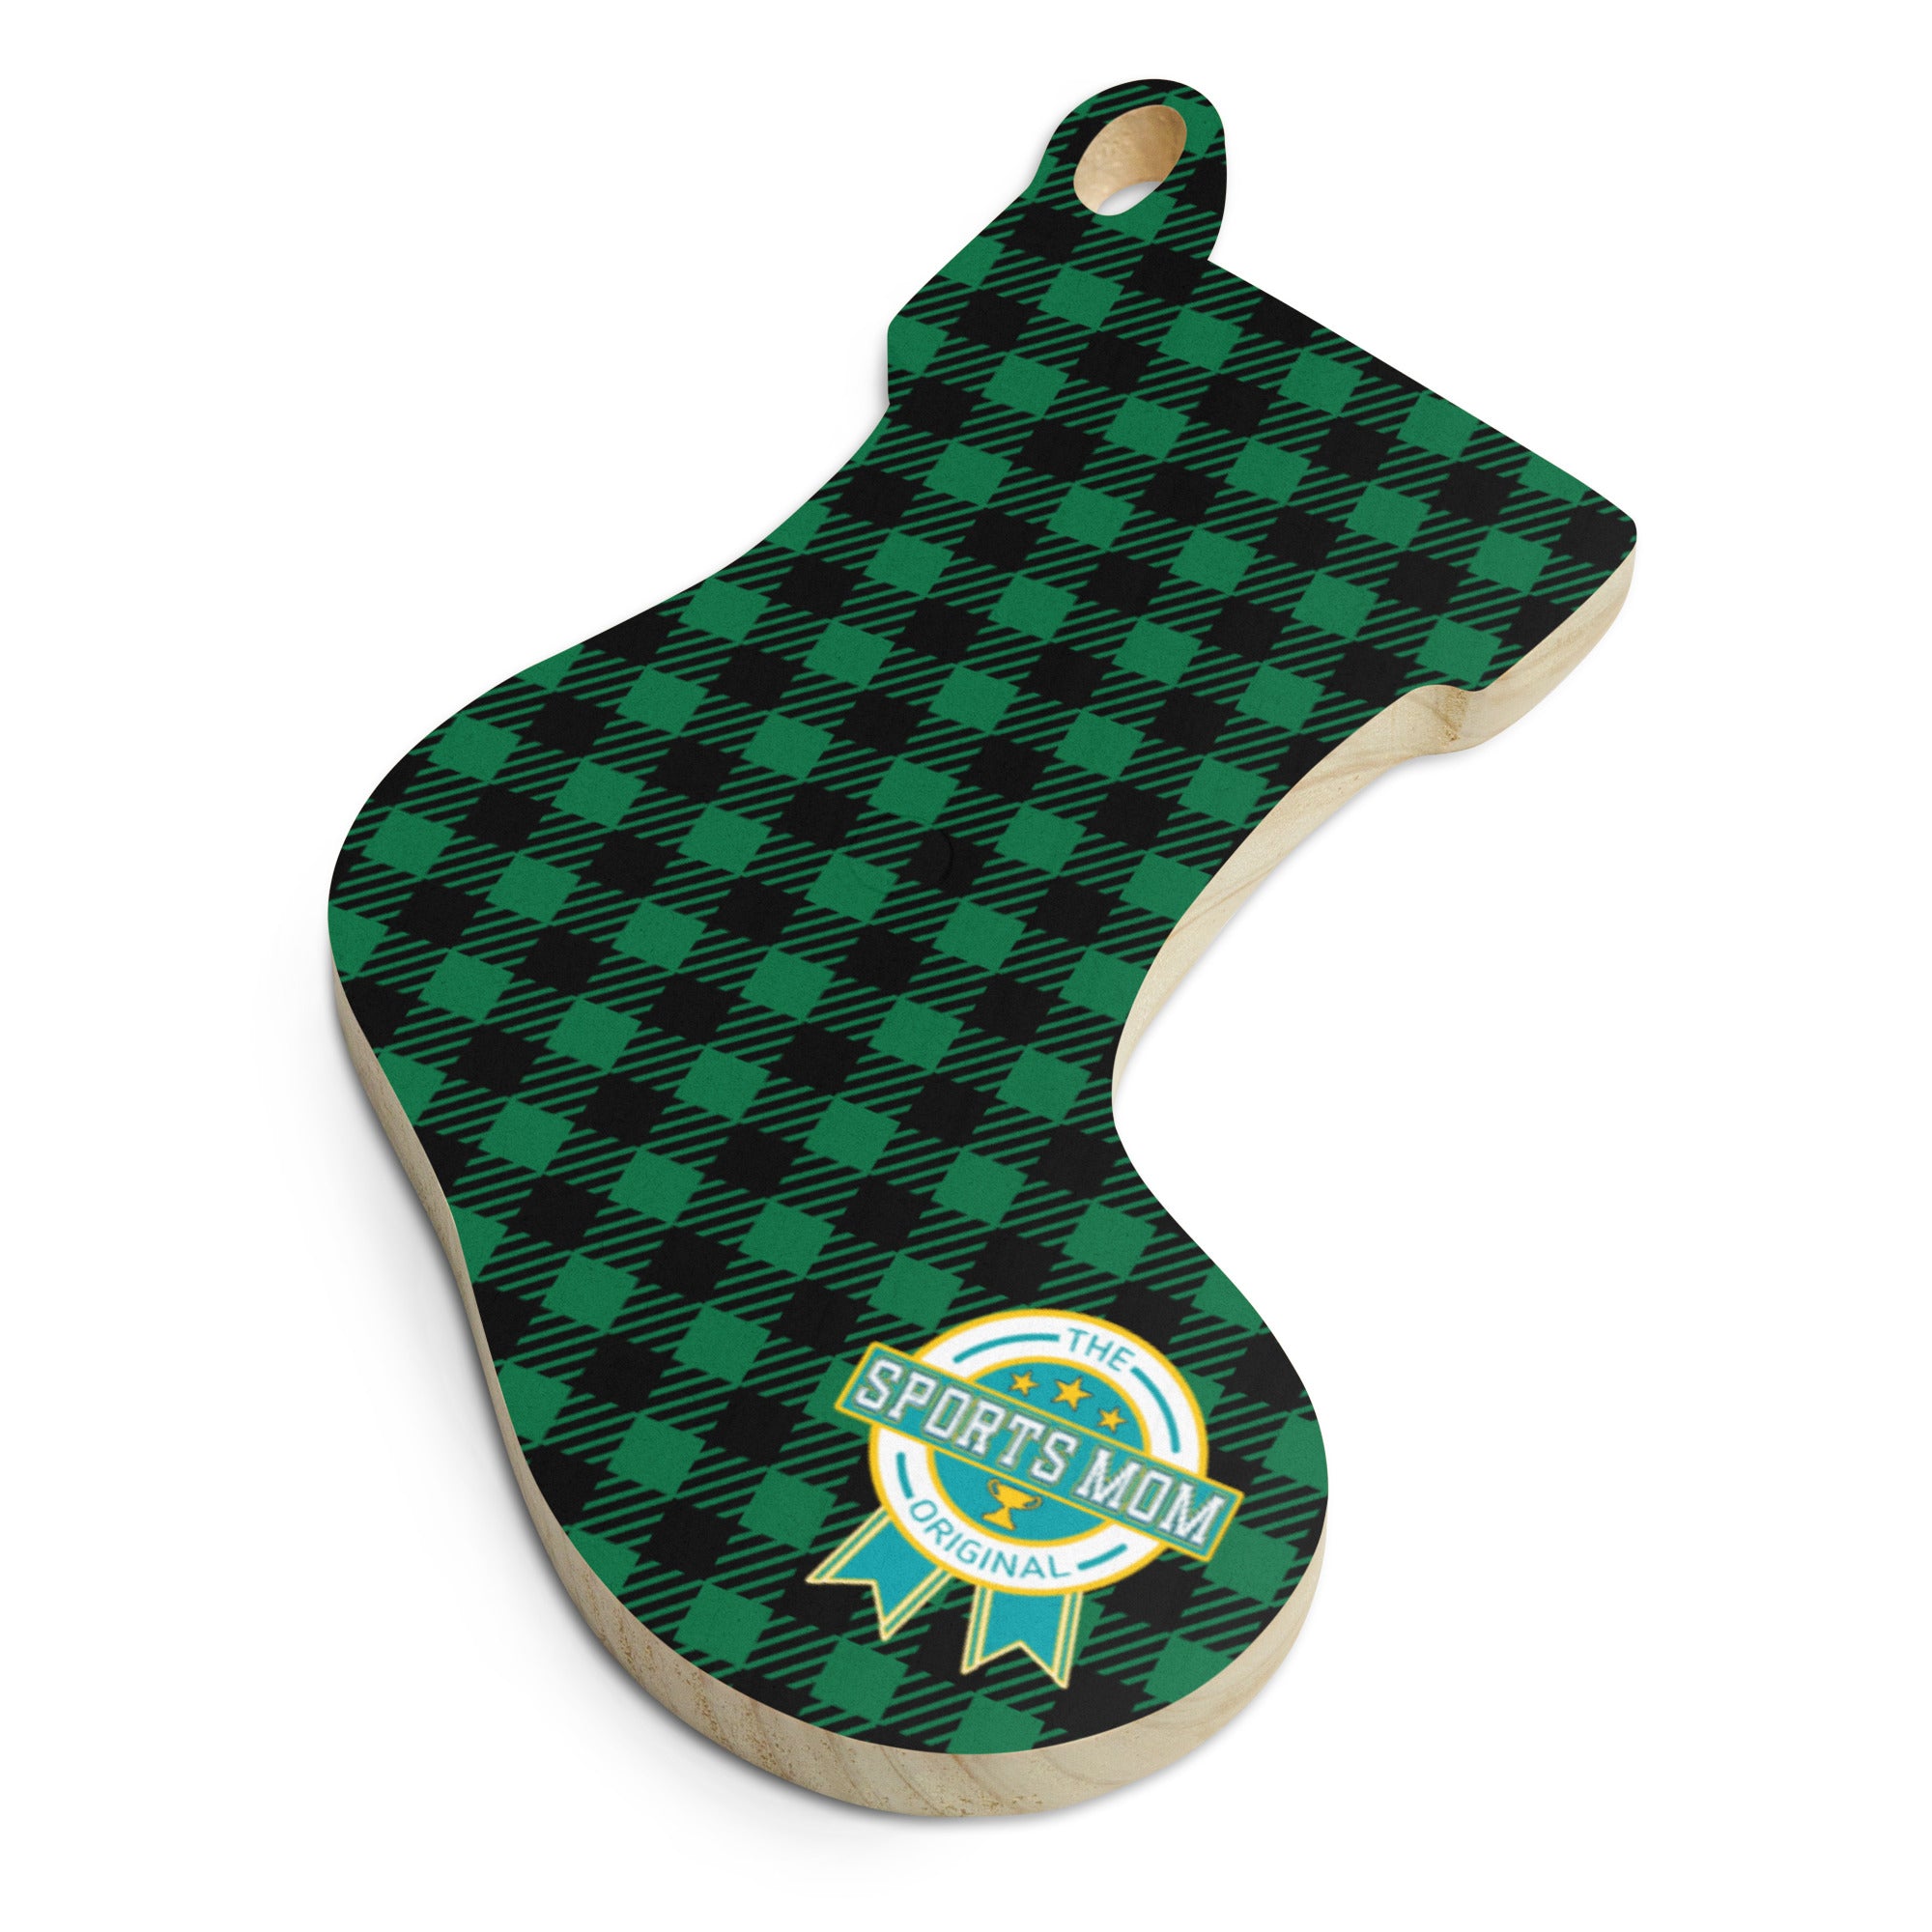 The Original Sports Mom - Wooden Ornaments - Flannel Panel